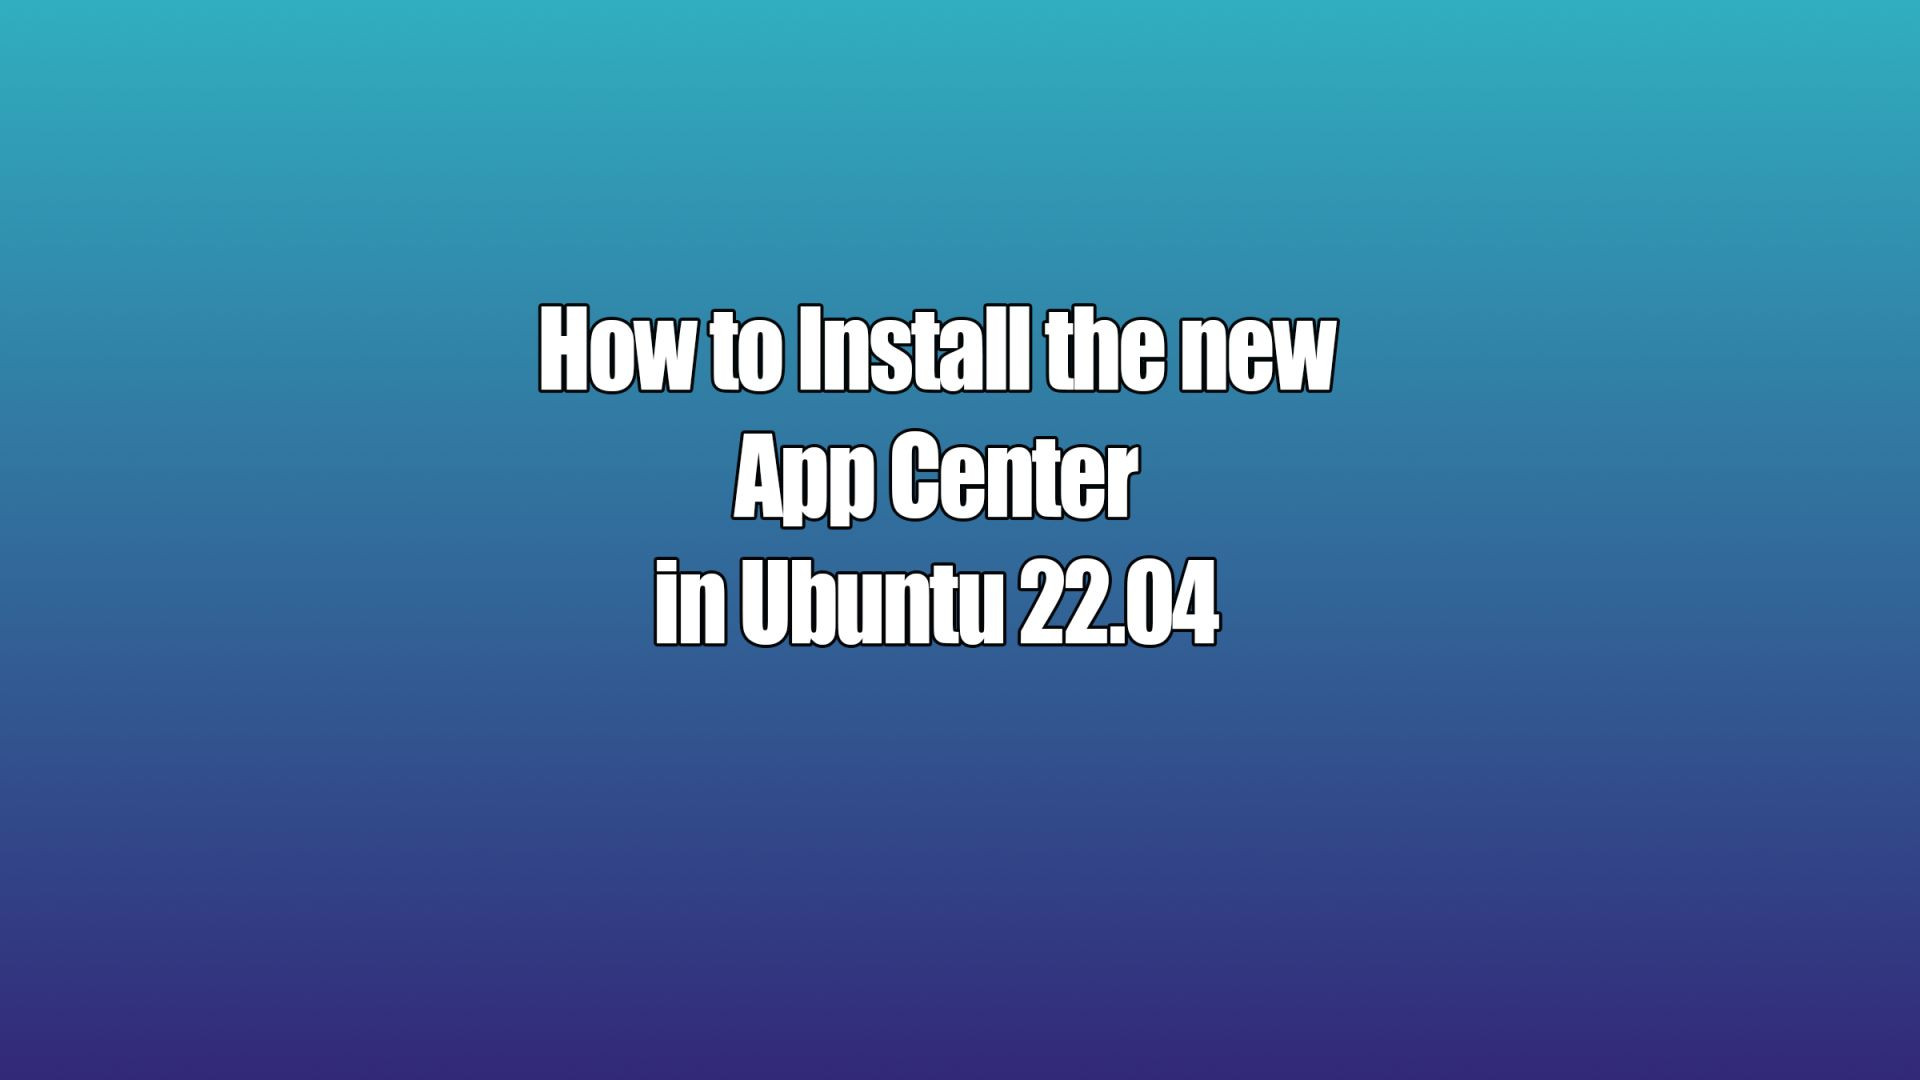 How to Install the new App Center in Ubuntu 22